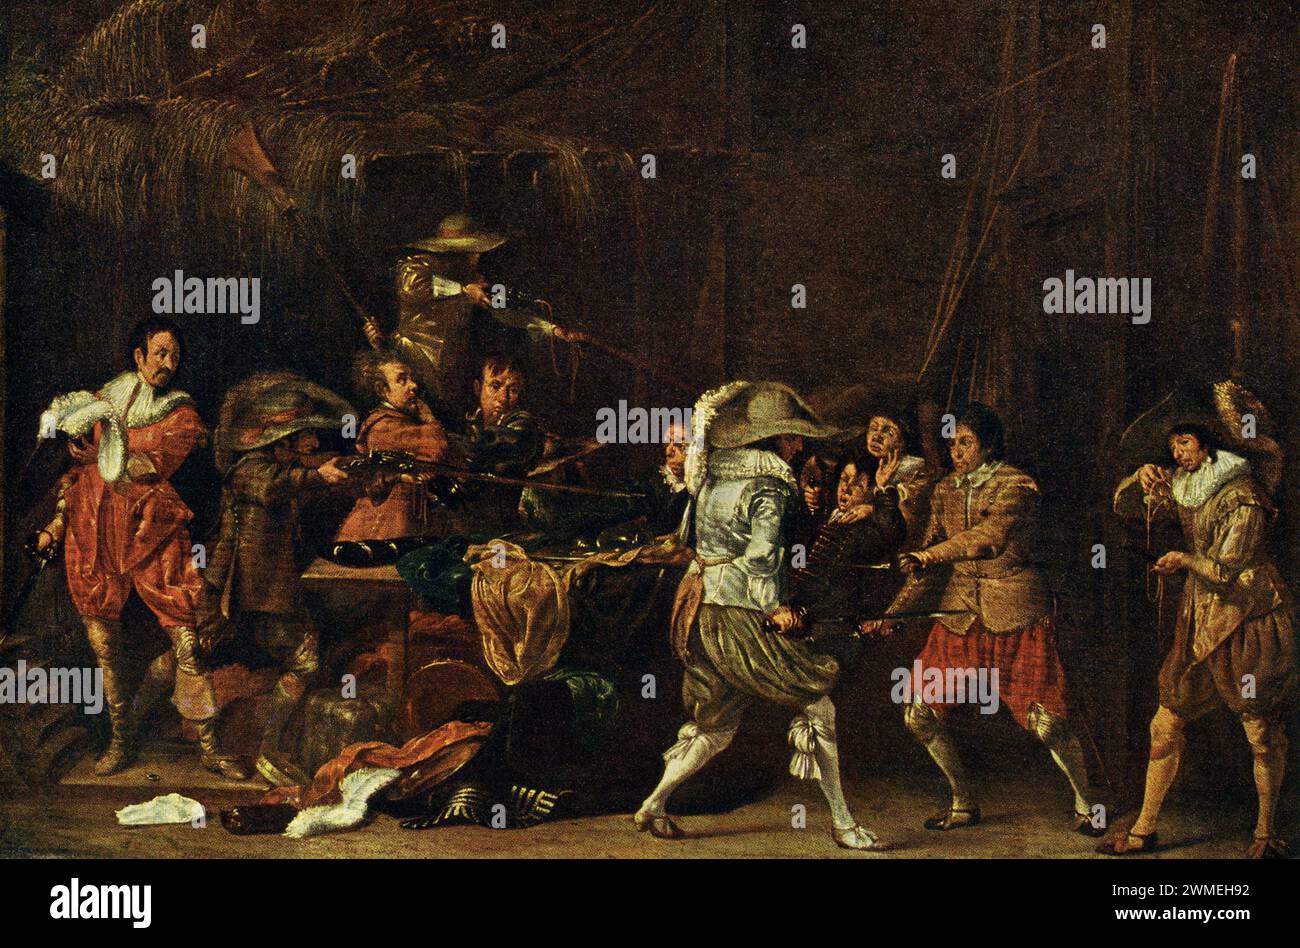 Willem Cornelisz Duyster (1599–1635) was a Dutch Golden Age painter from Amsterdam, best known for his 'guardroom scenes' (cortegaarddje), genre paintings showing the military life. In this painting by Duyster, soldiers fight over booty in a barn. Stock Photo